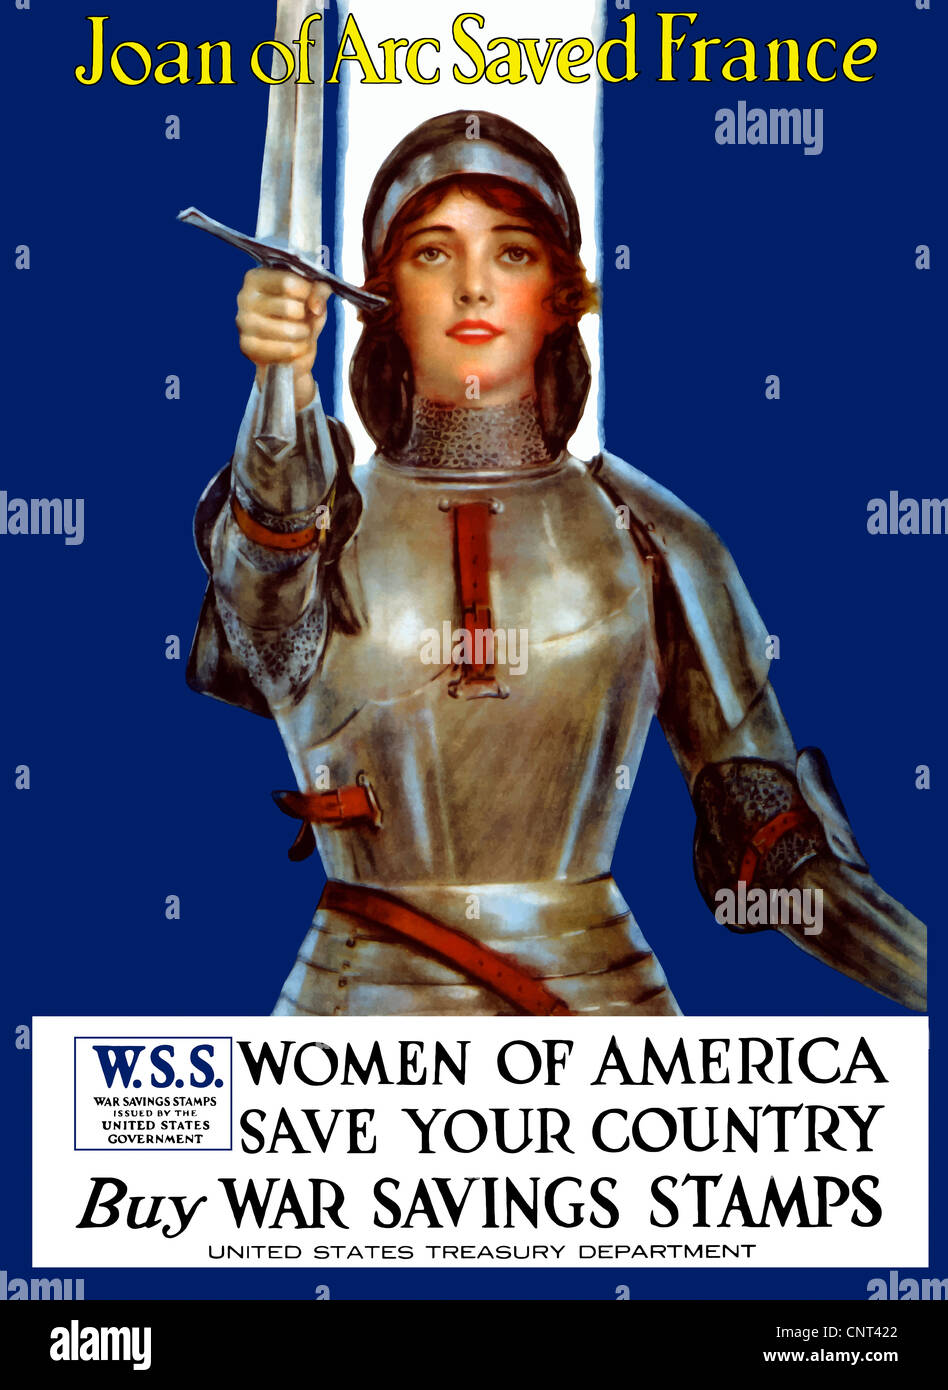 Vintage World War One poster of Joan of Arc wearing armor, raising a sword. Stock Photo